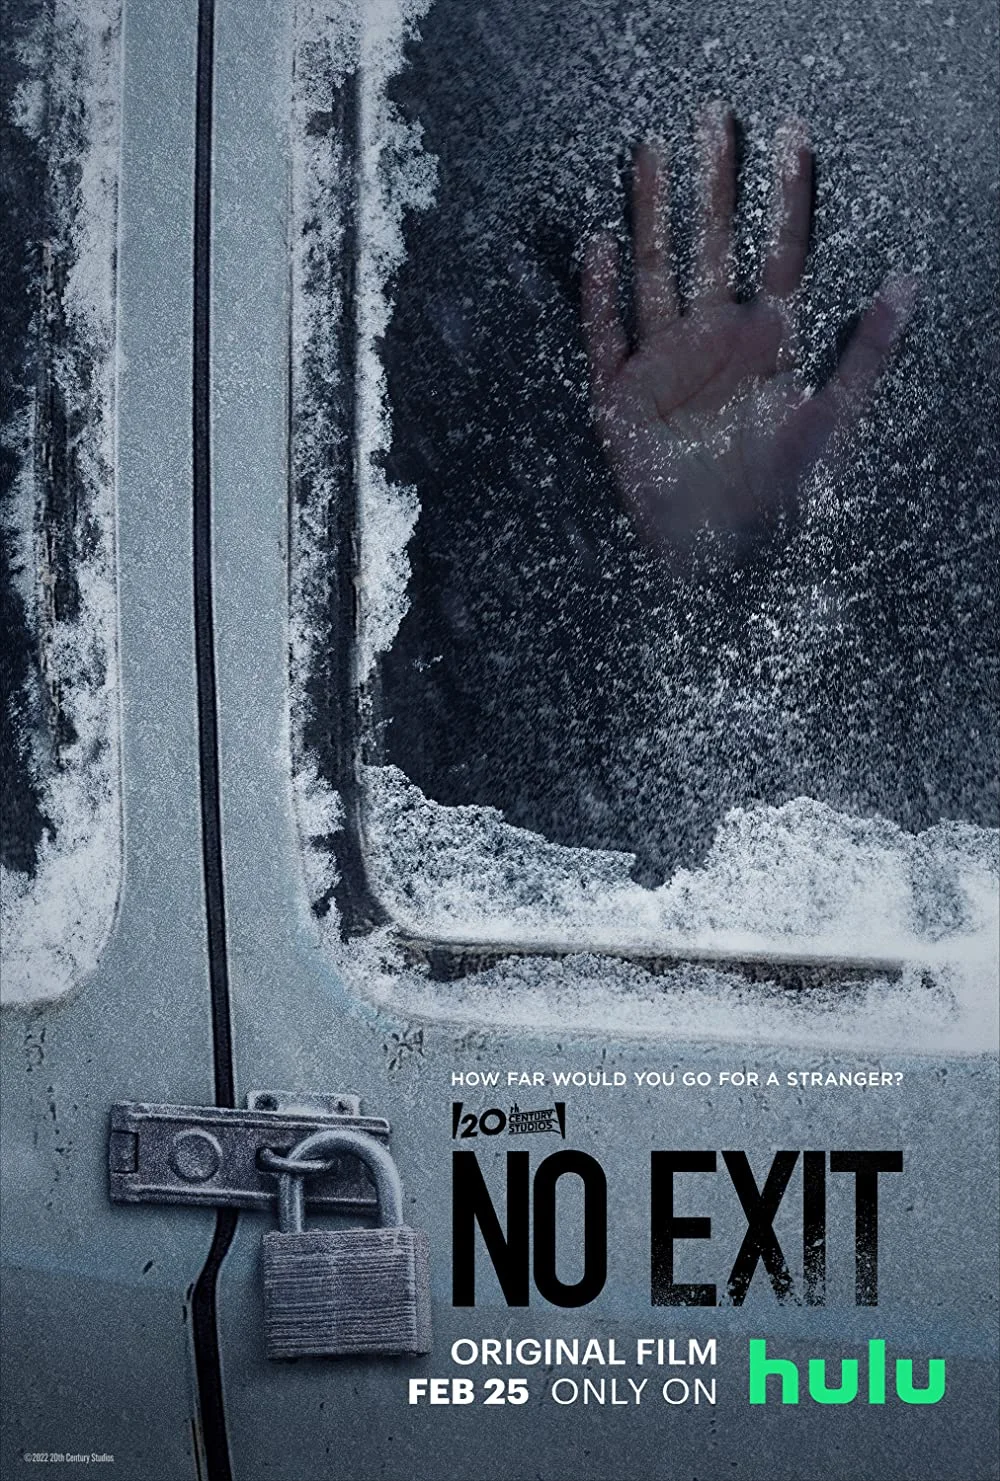 "No Exit": A woman lost in a Blizzard night encounters a kidnapper, strangers help each other but have their own plans